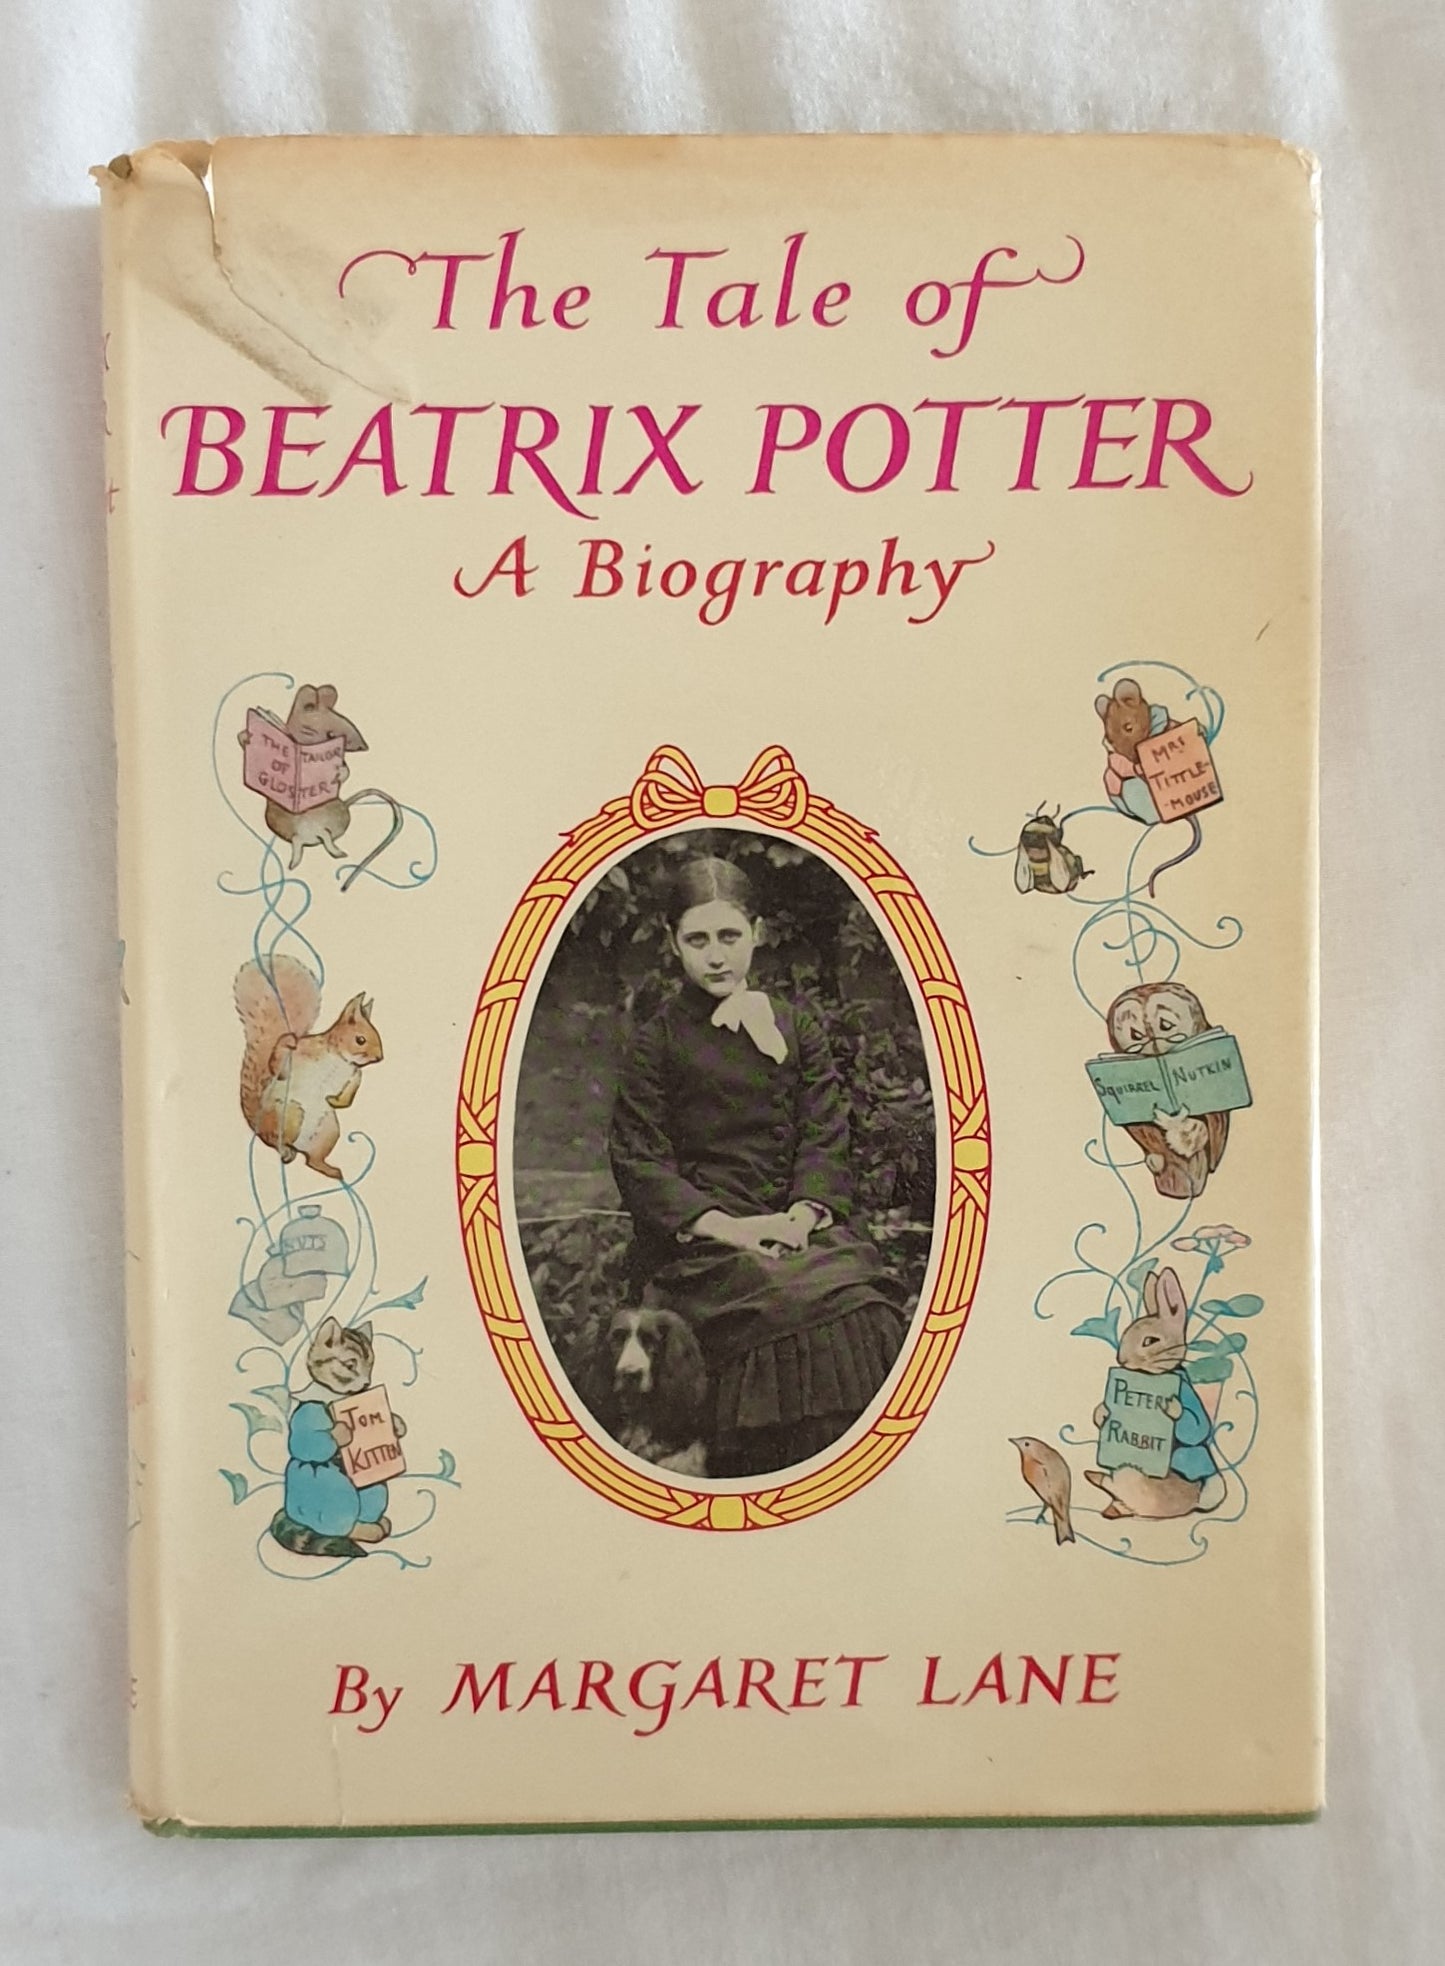 The Tale of Beatrix Potter A Biography by Margaret Lane